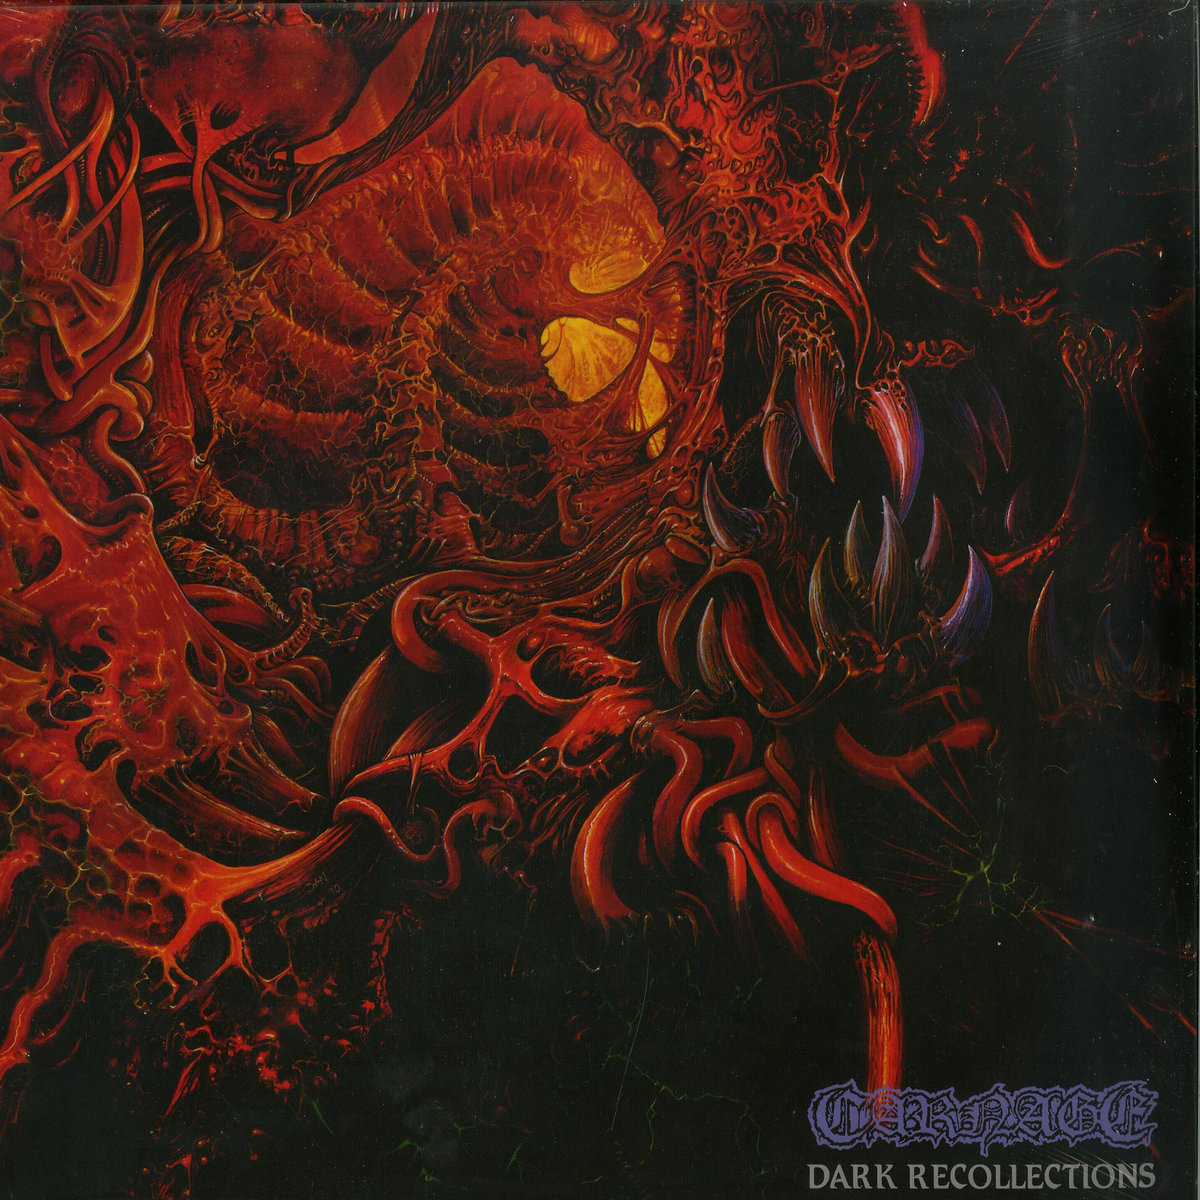 Carnage - "Dark Recollections" - 1990